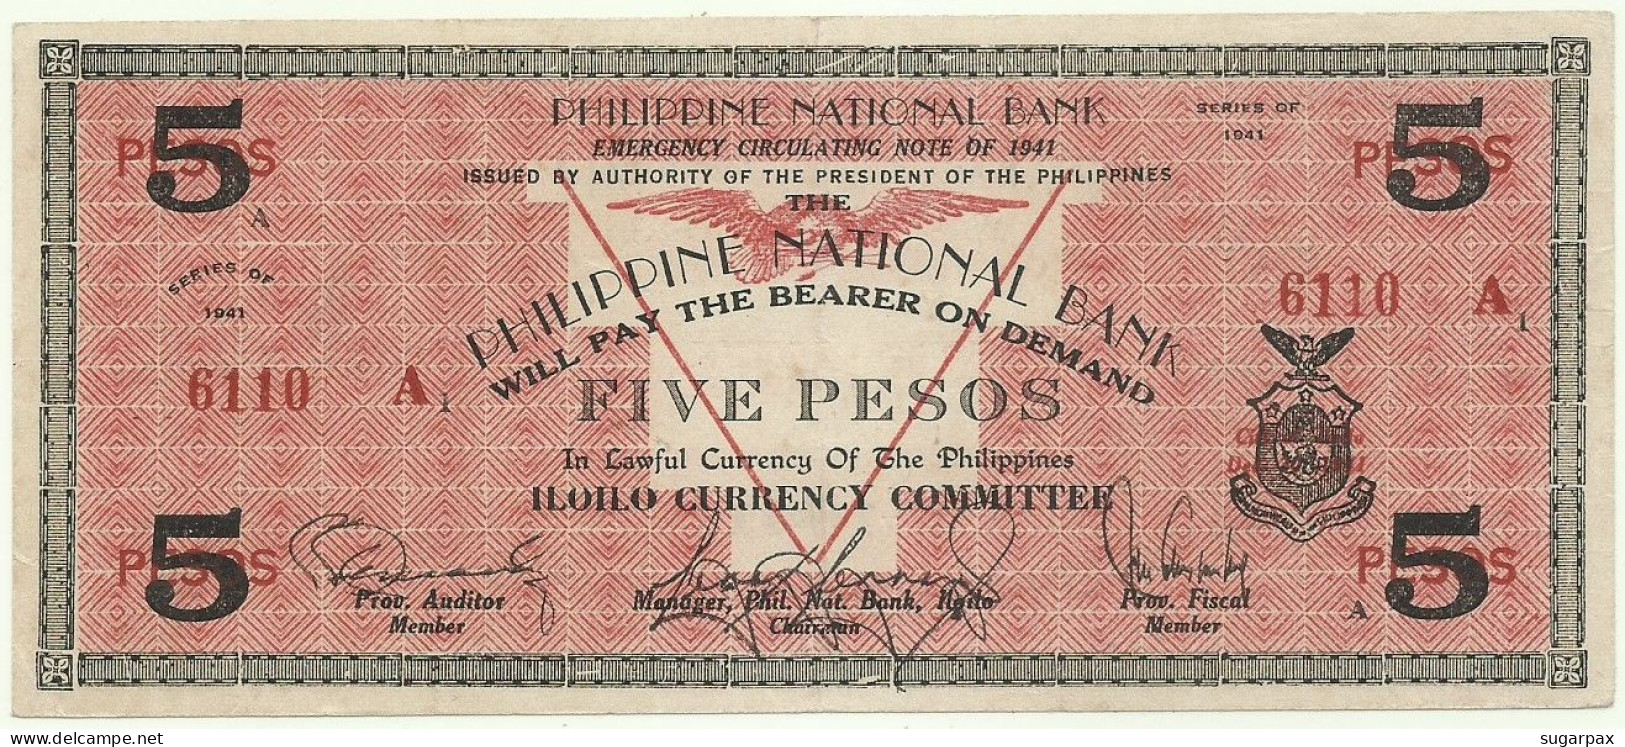 PHILIPPINES - 5 Pesos - 1941 - Pick S 307 - Serie A - LOW NUMBER - ILOILO Currency Committee - Filipinas